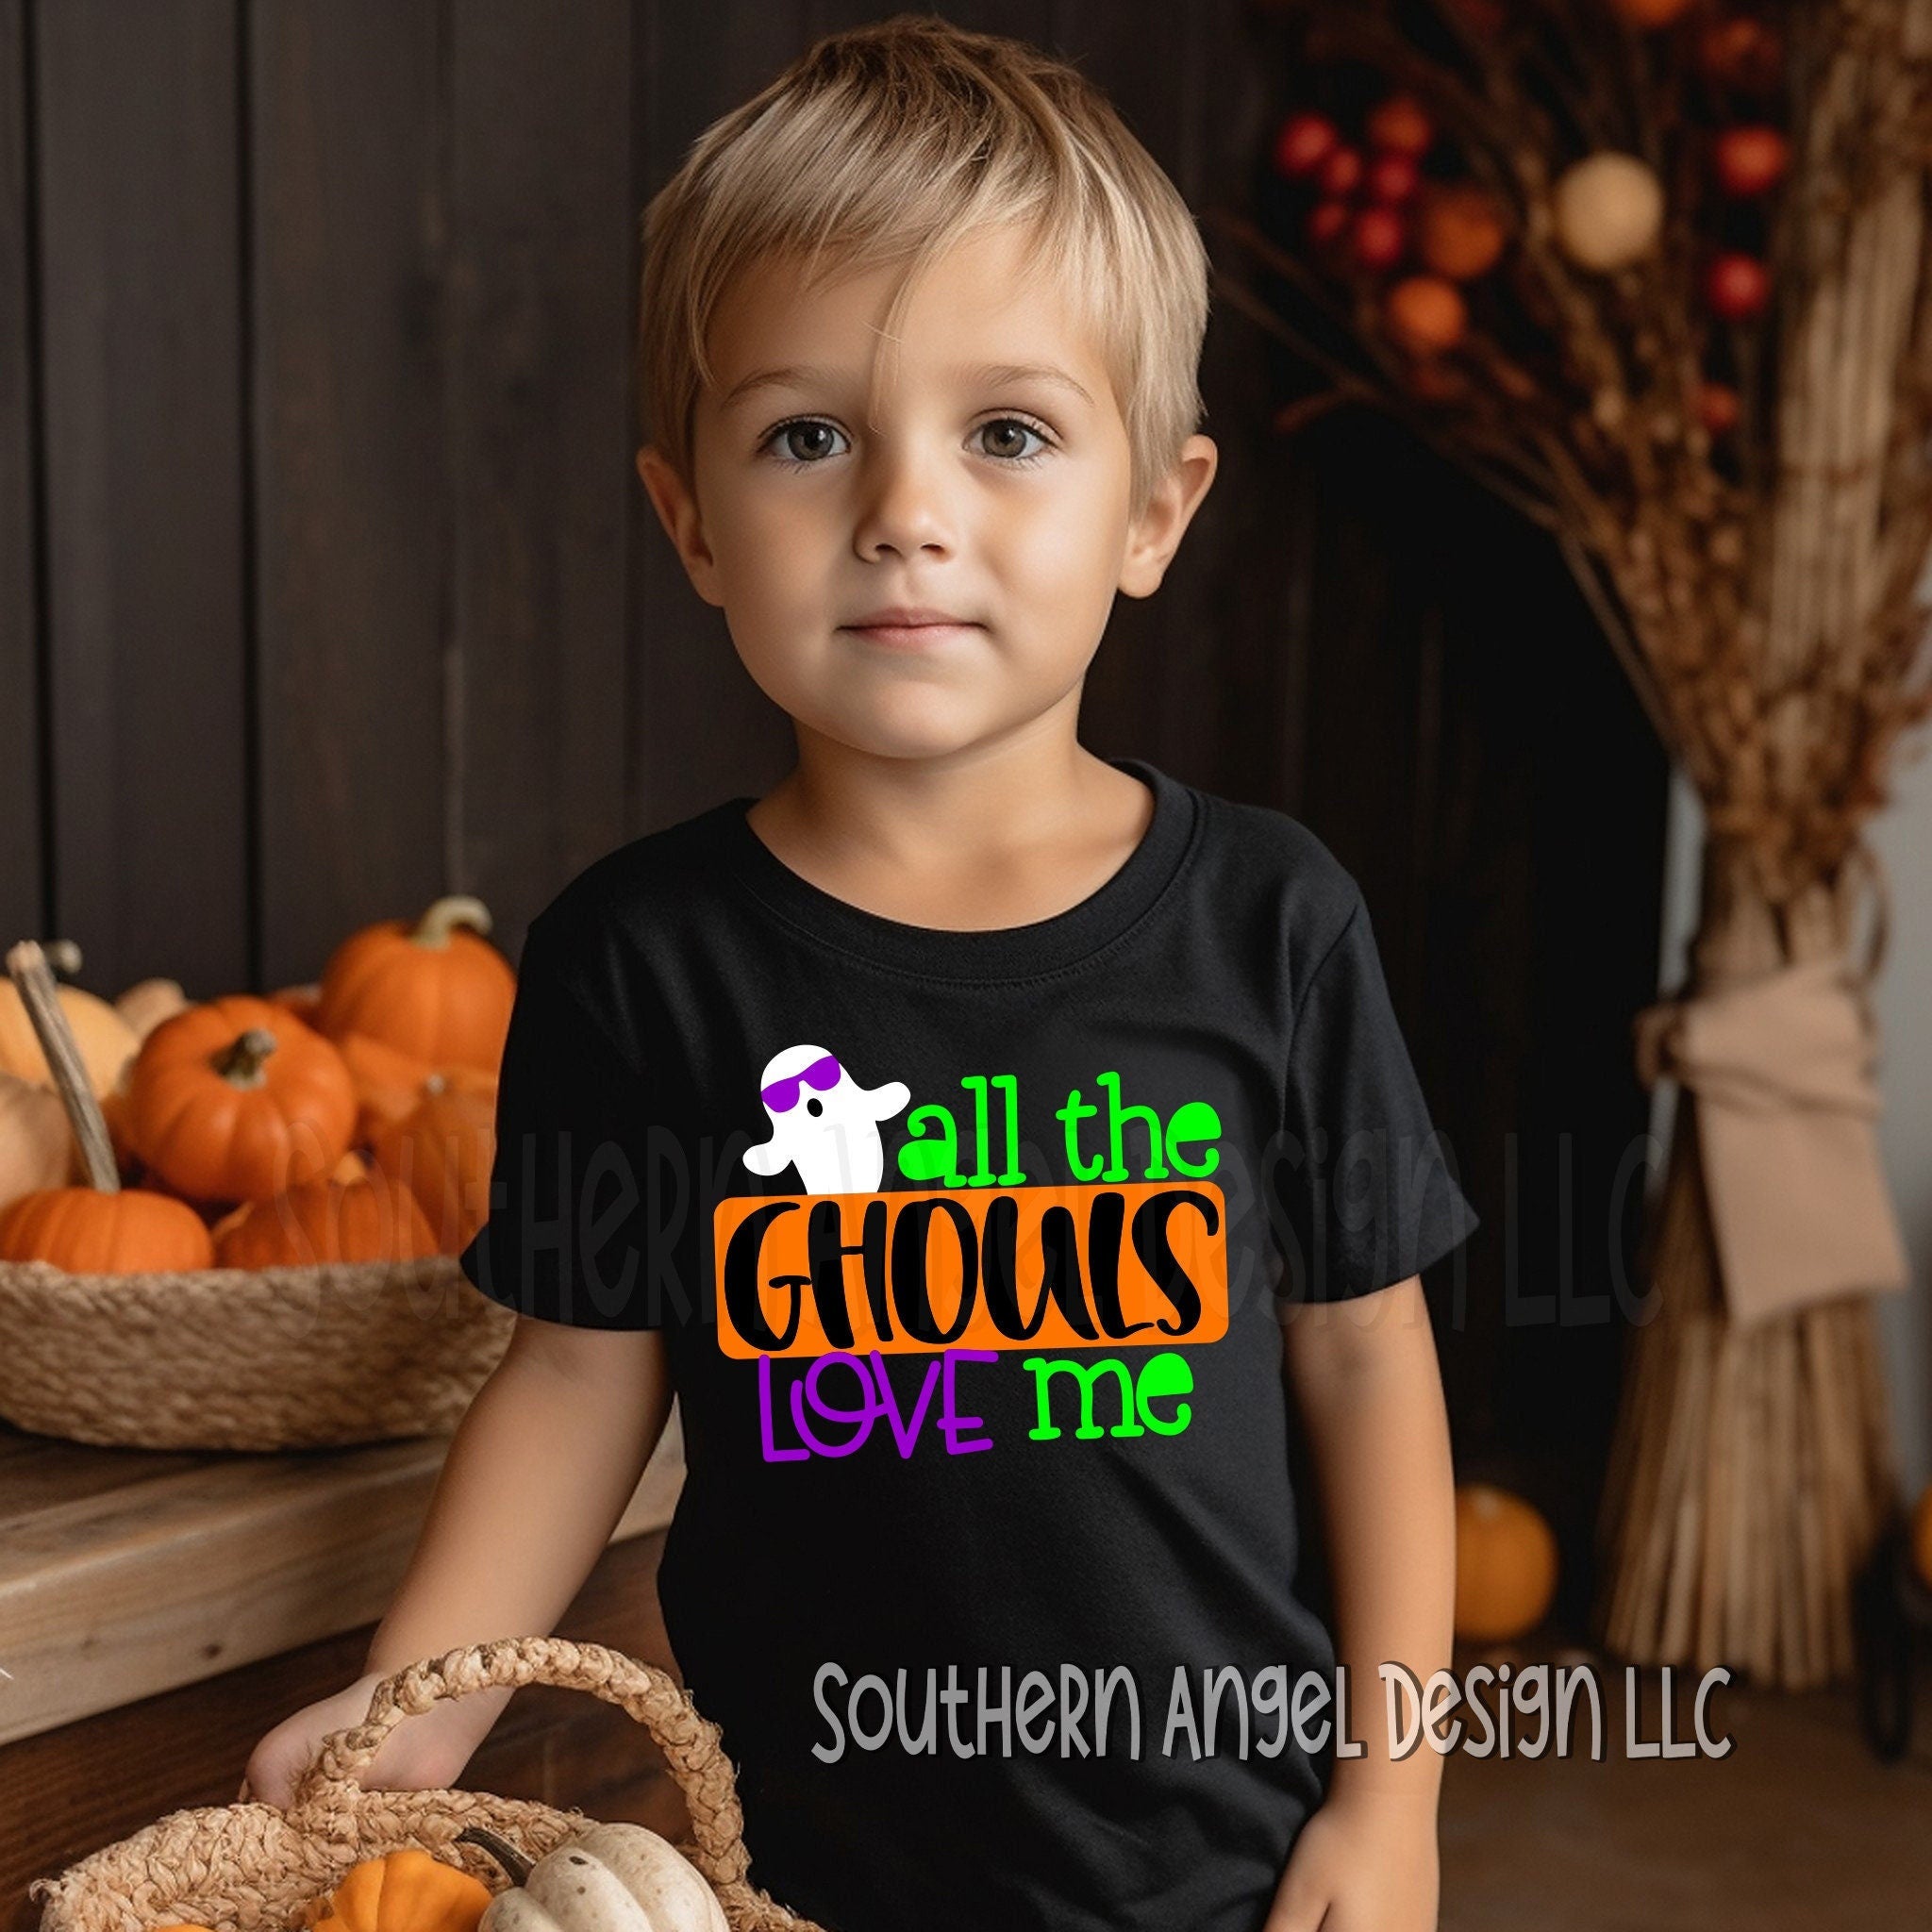 All the ghouls love me t-shirt